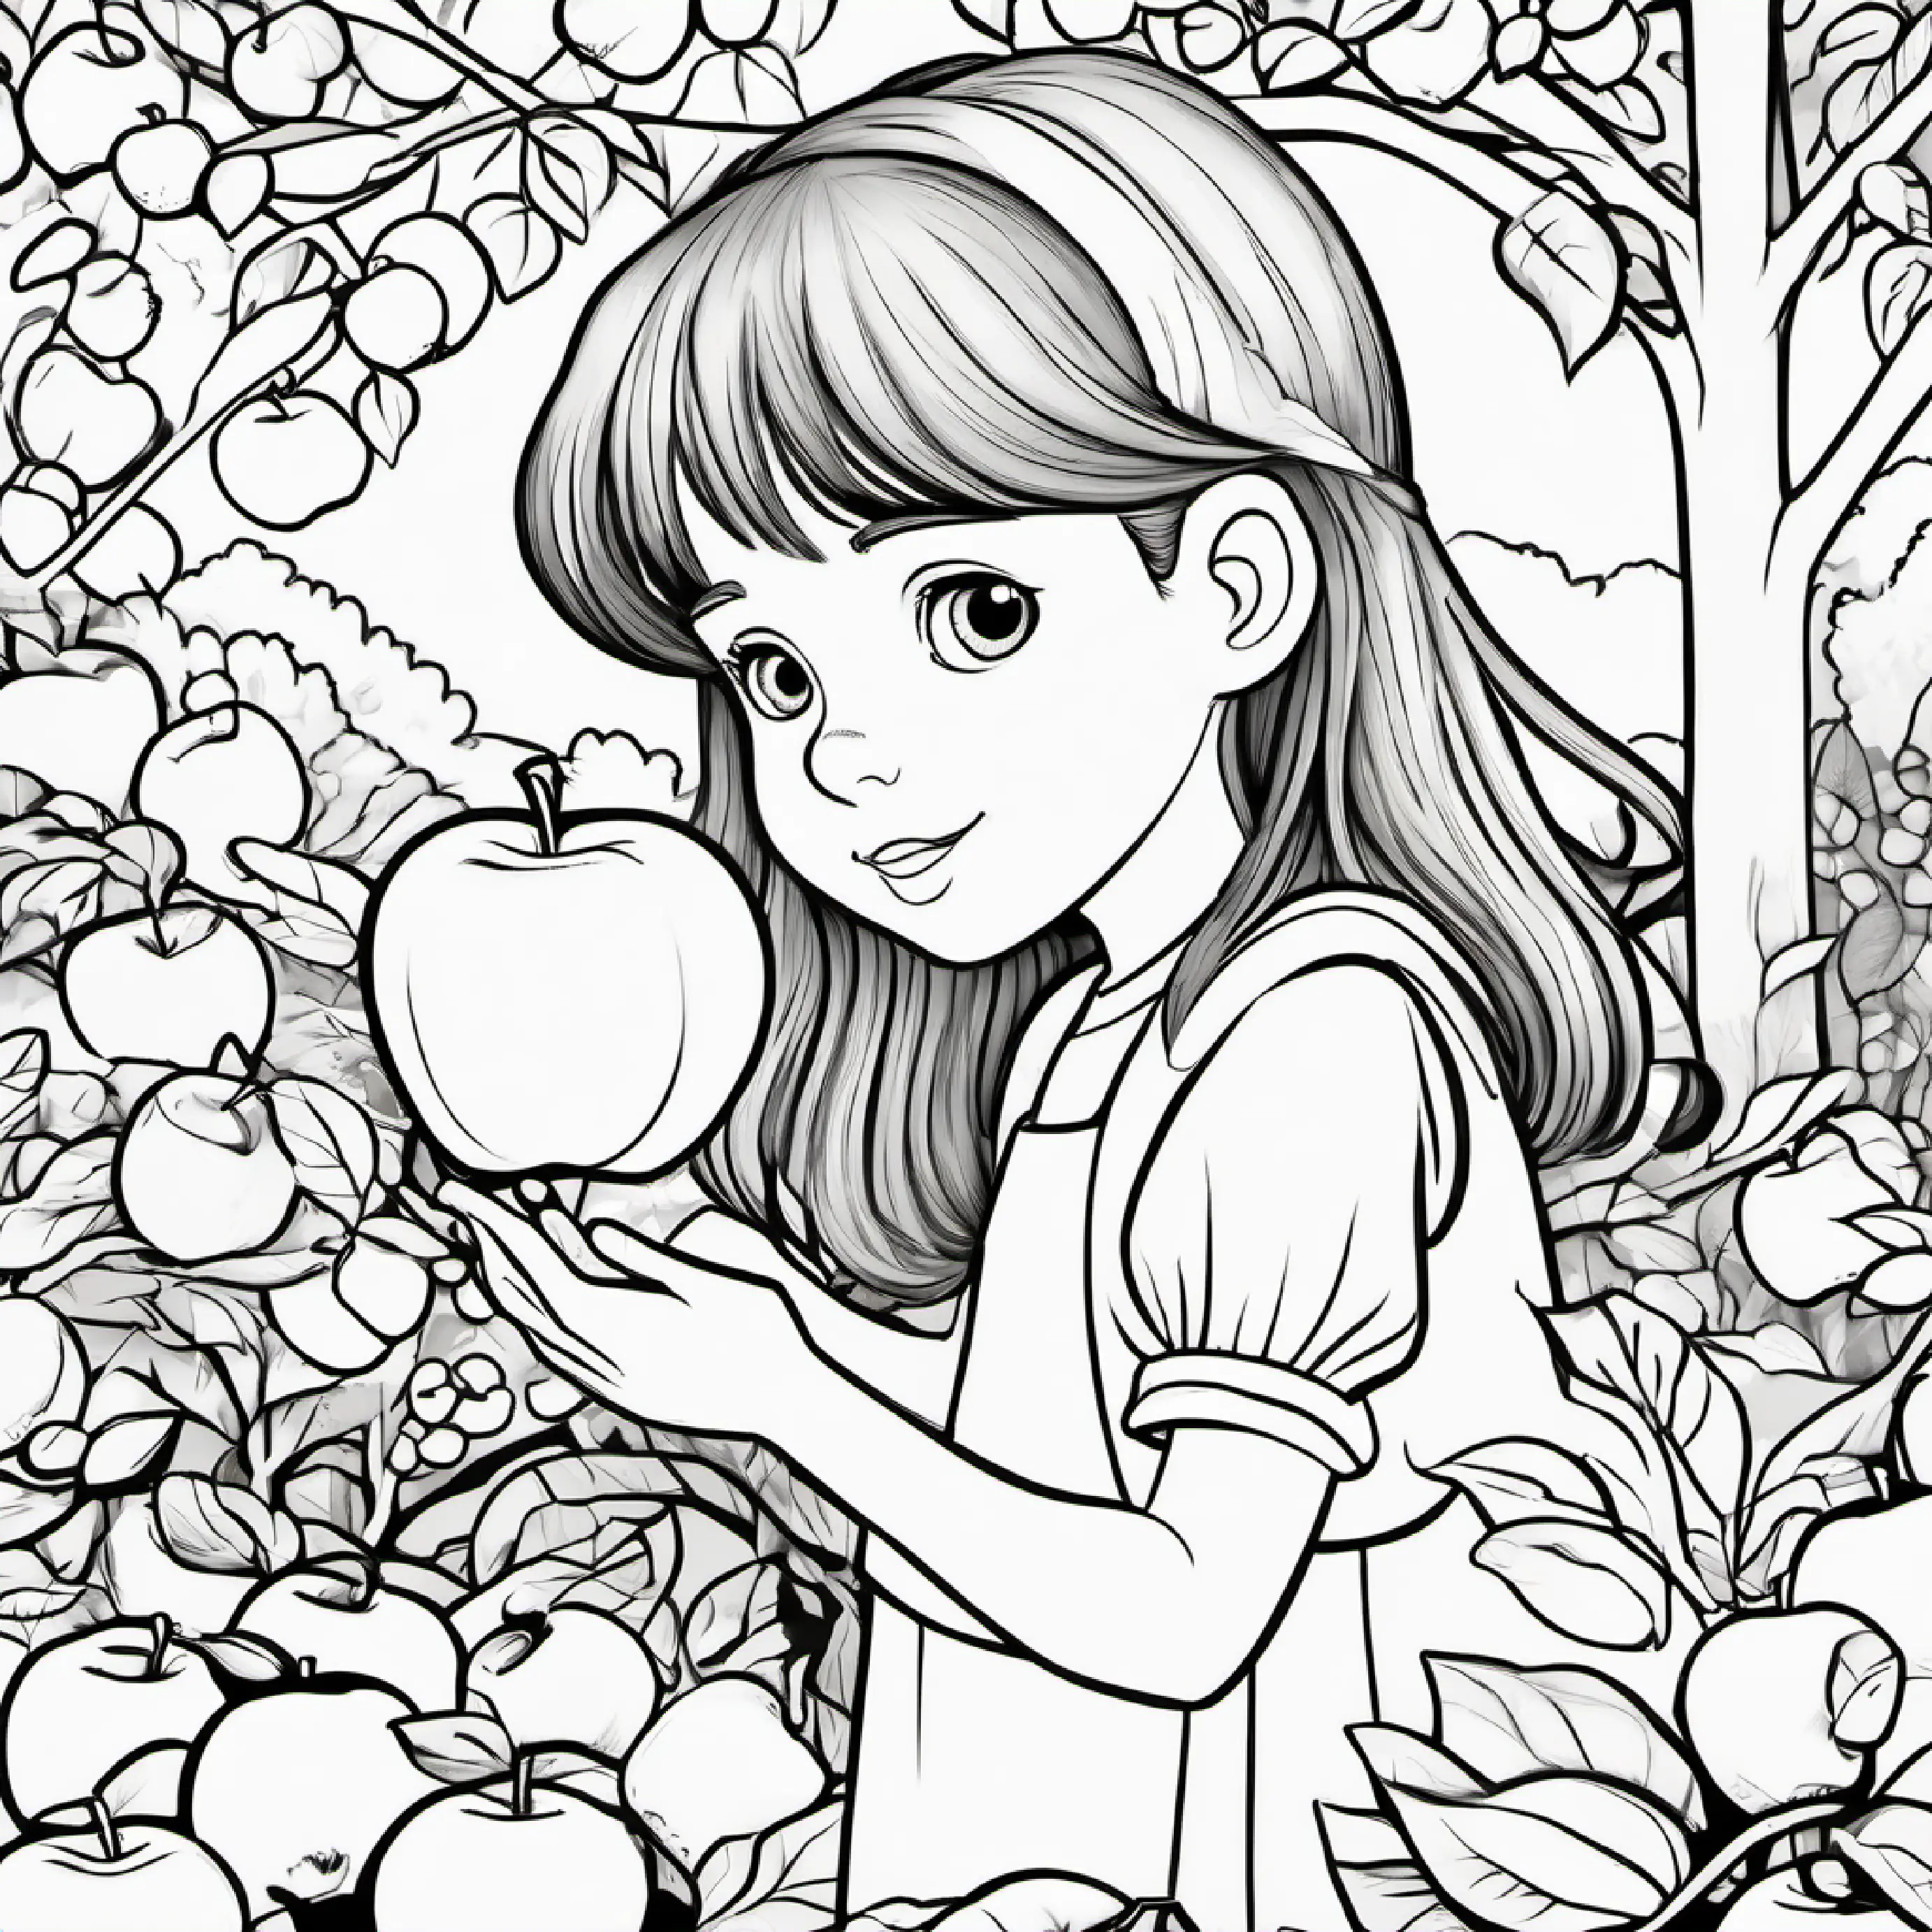 Young girl with brown hair and bright blue eyes counts and finds seven apples.